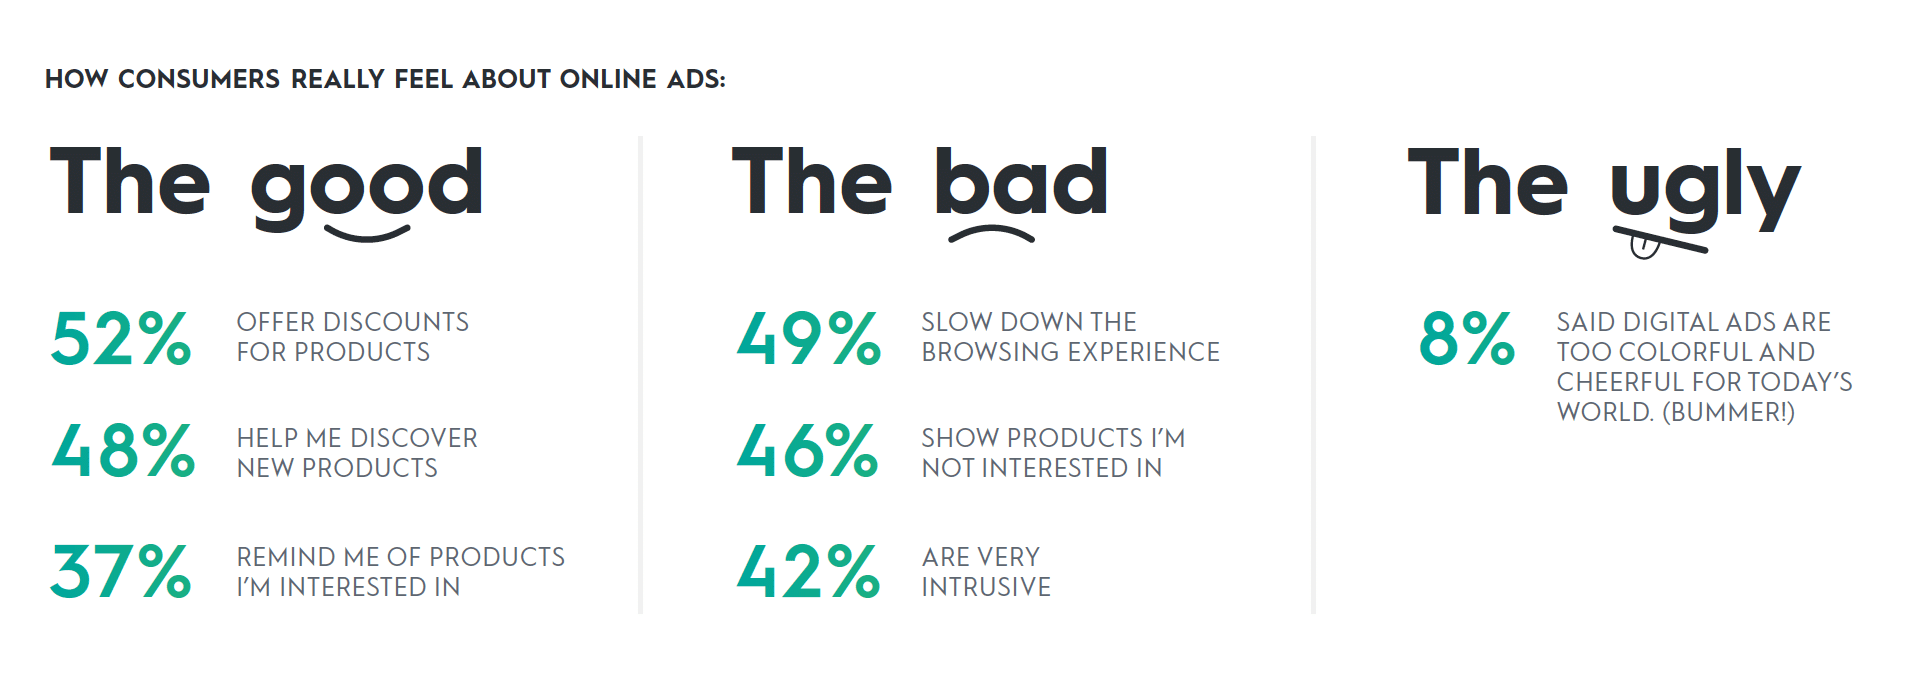 how consumers feel about online ads